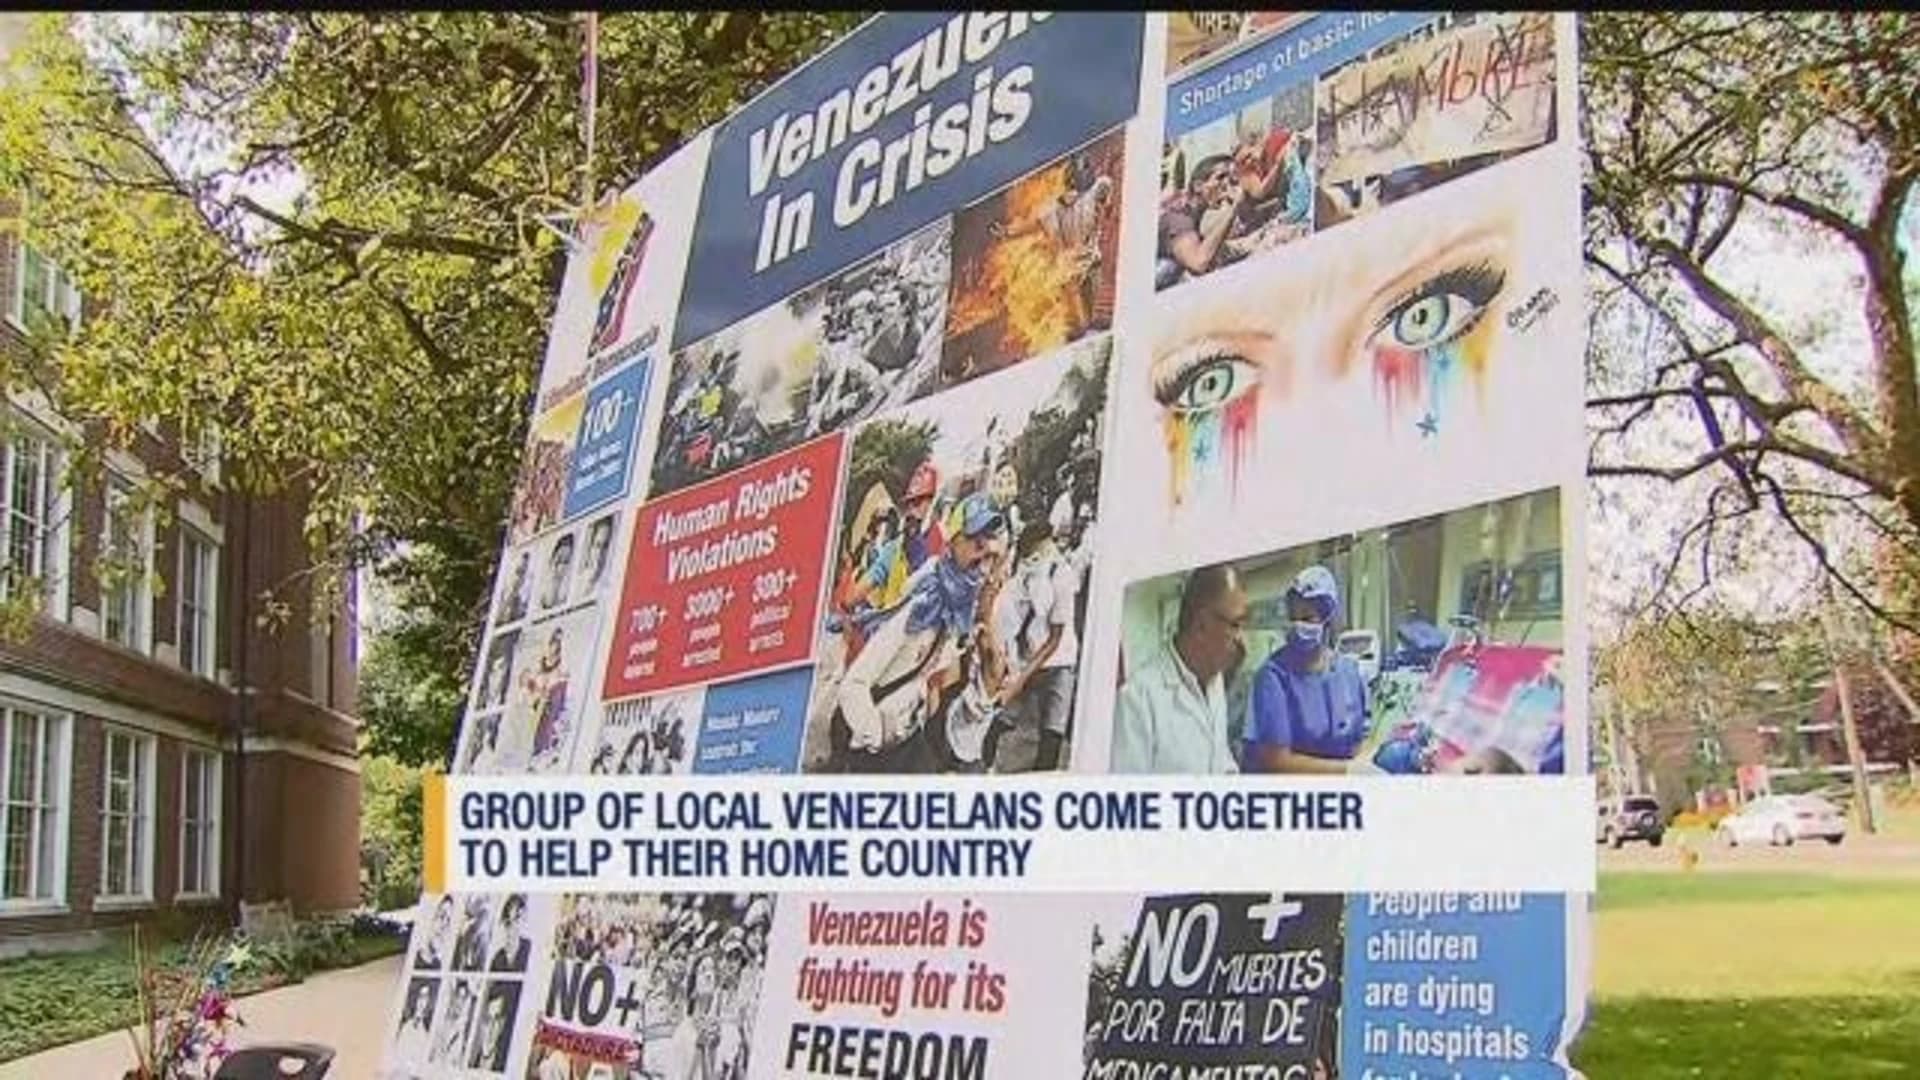 Local Venezuelans gather in Greenwich to help home country